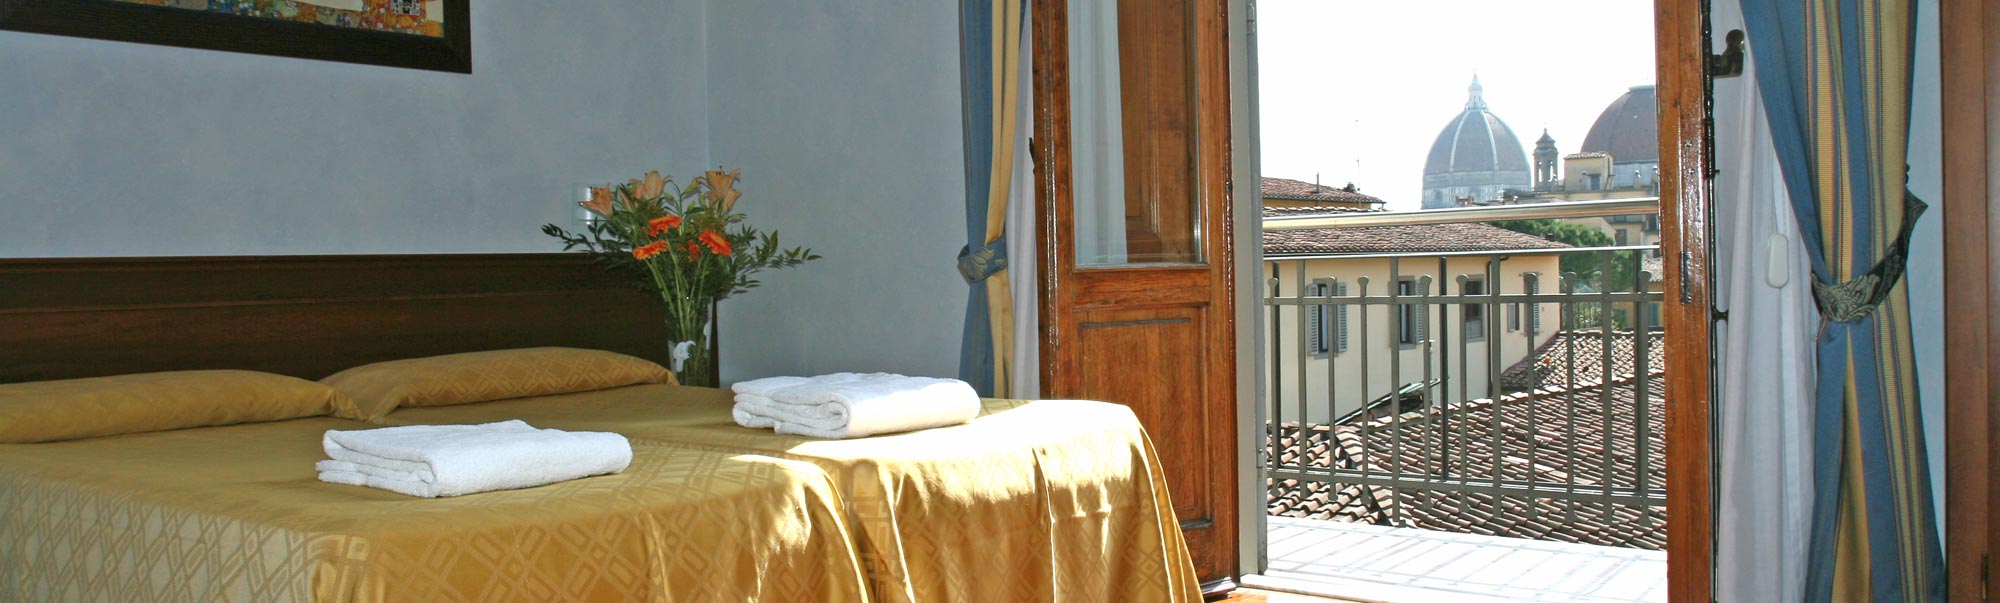 Hotel Palazzo Vecchio Florence Center - Official Site | 3 Stars Hotel Firenze